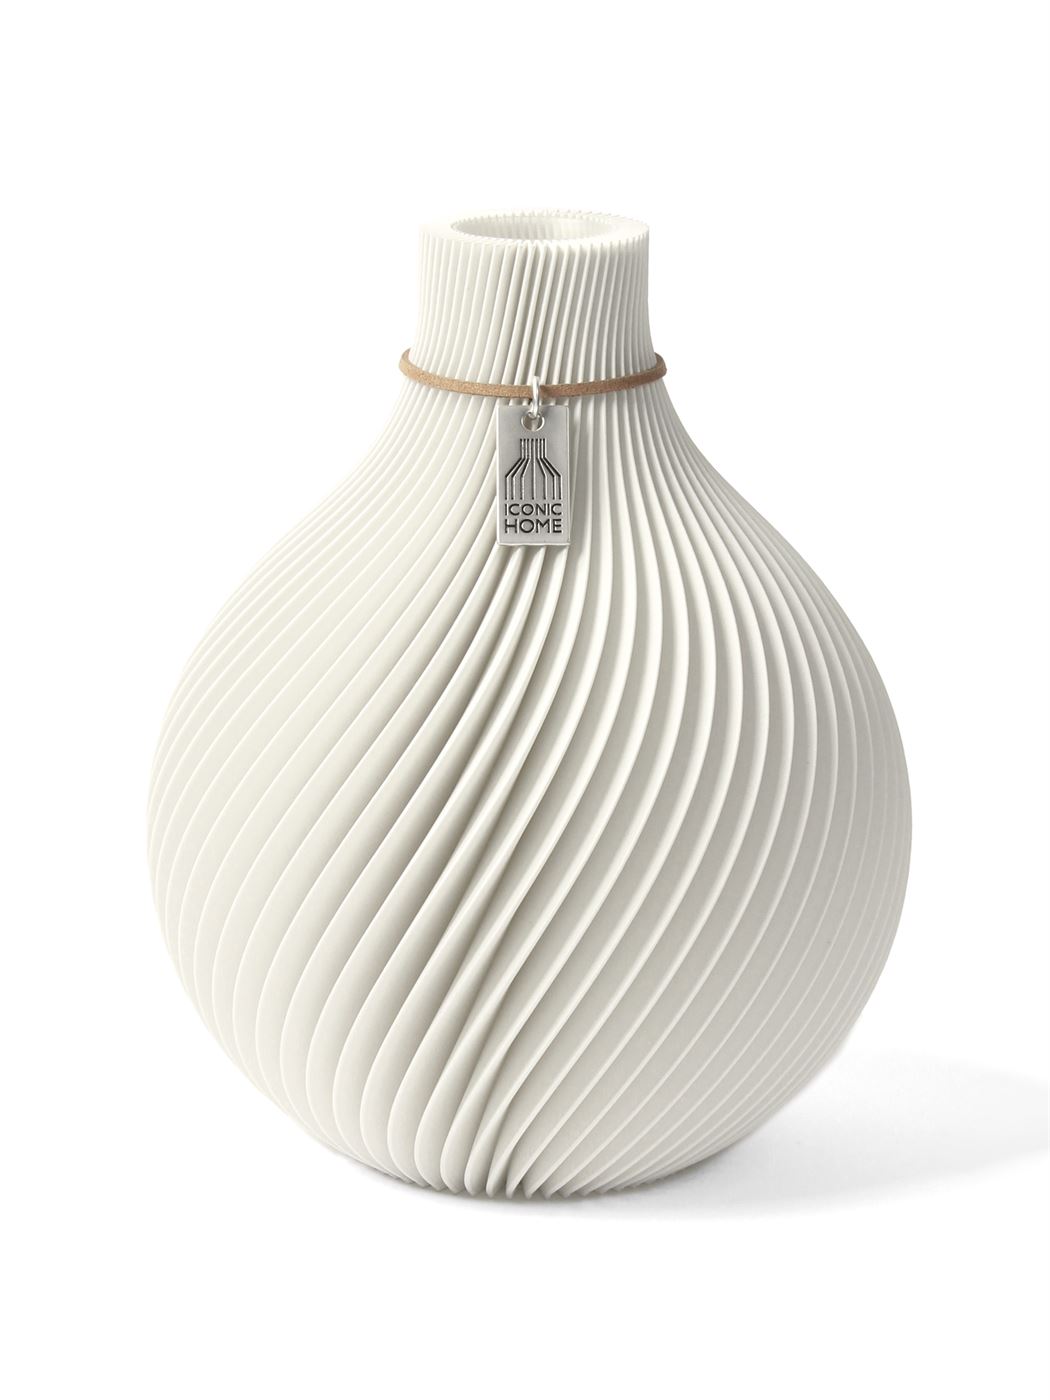 Vase Sphere weiß Pure White Small ICONIC HOME